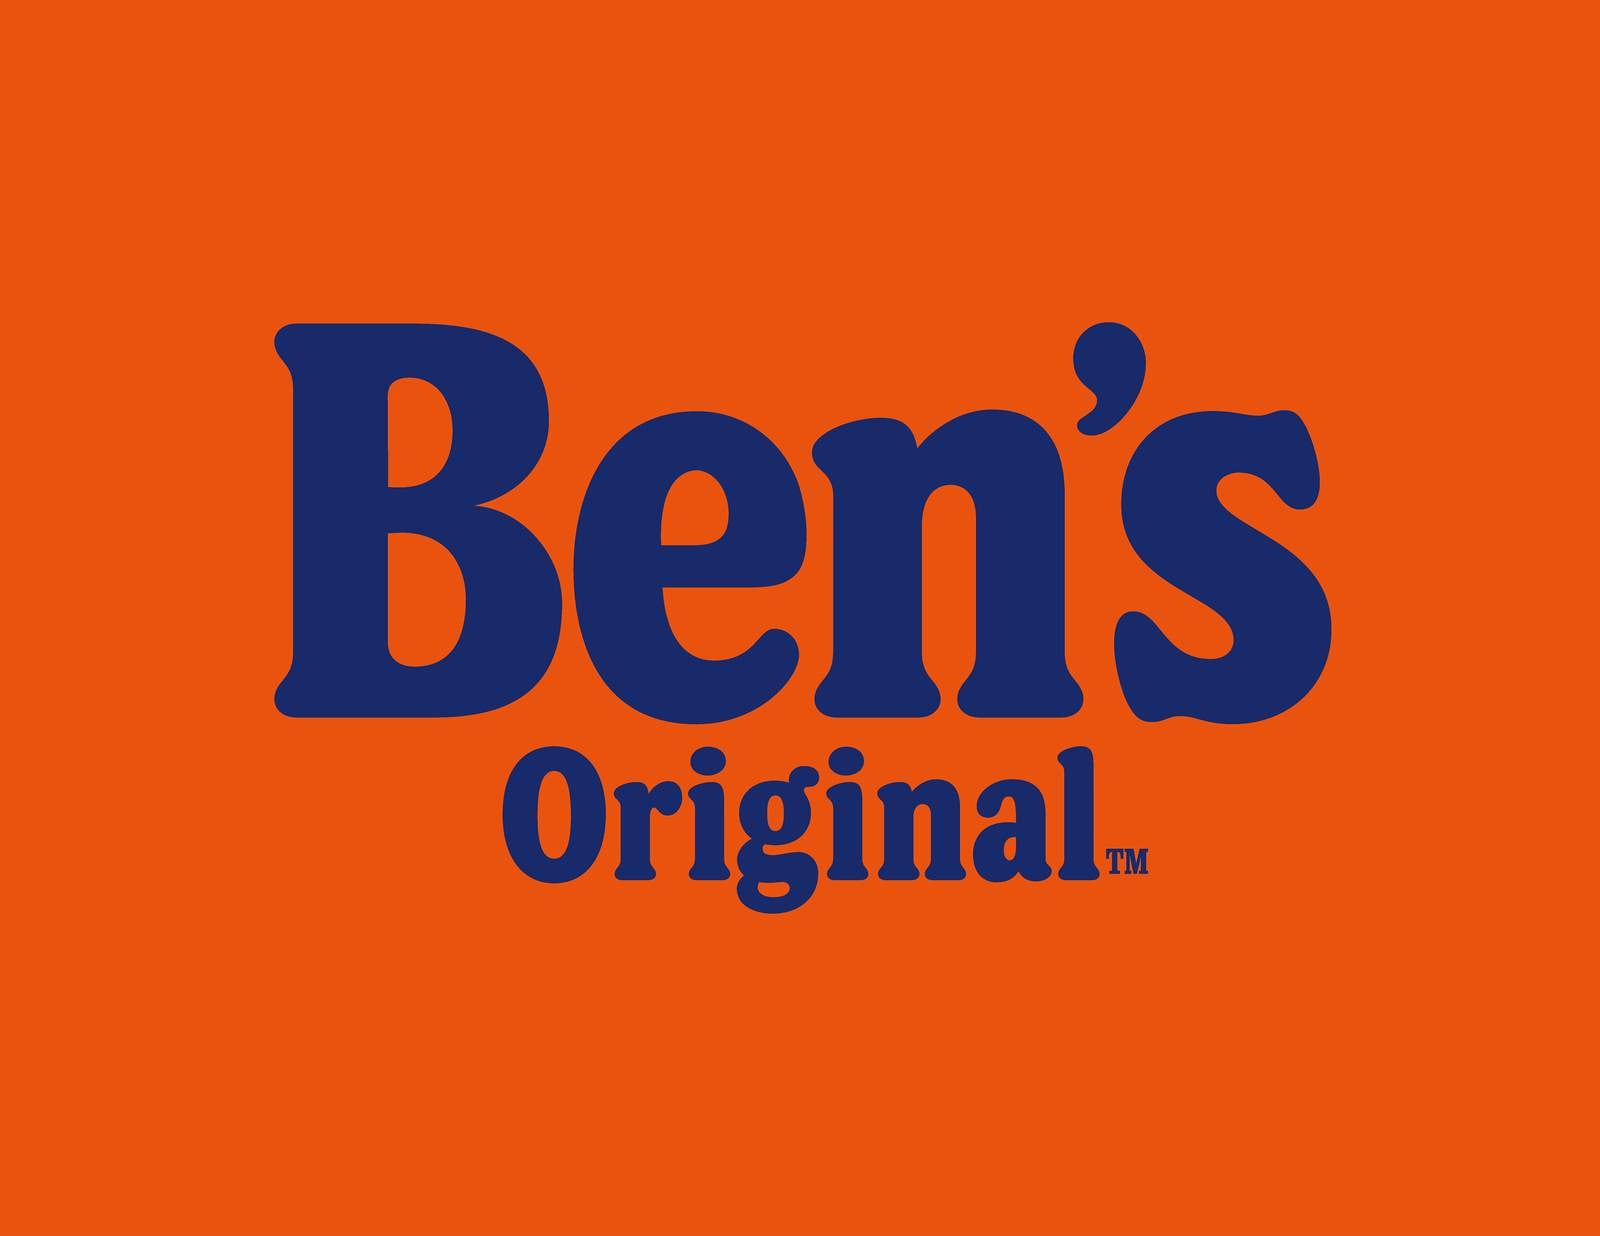 Here’s what Uncle Ben’s rice will now be called